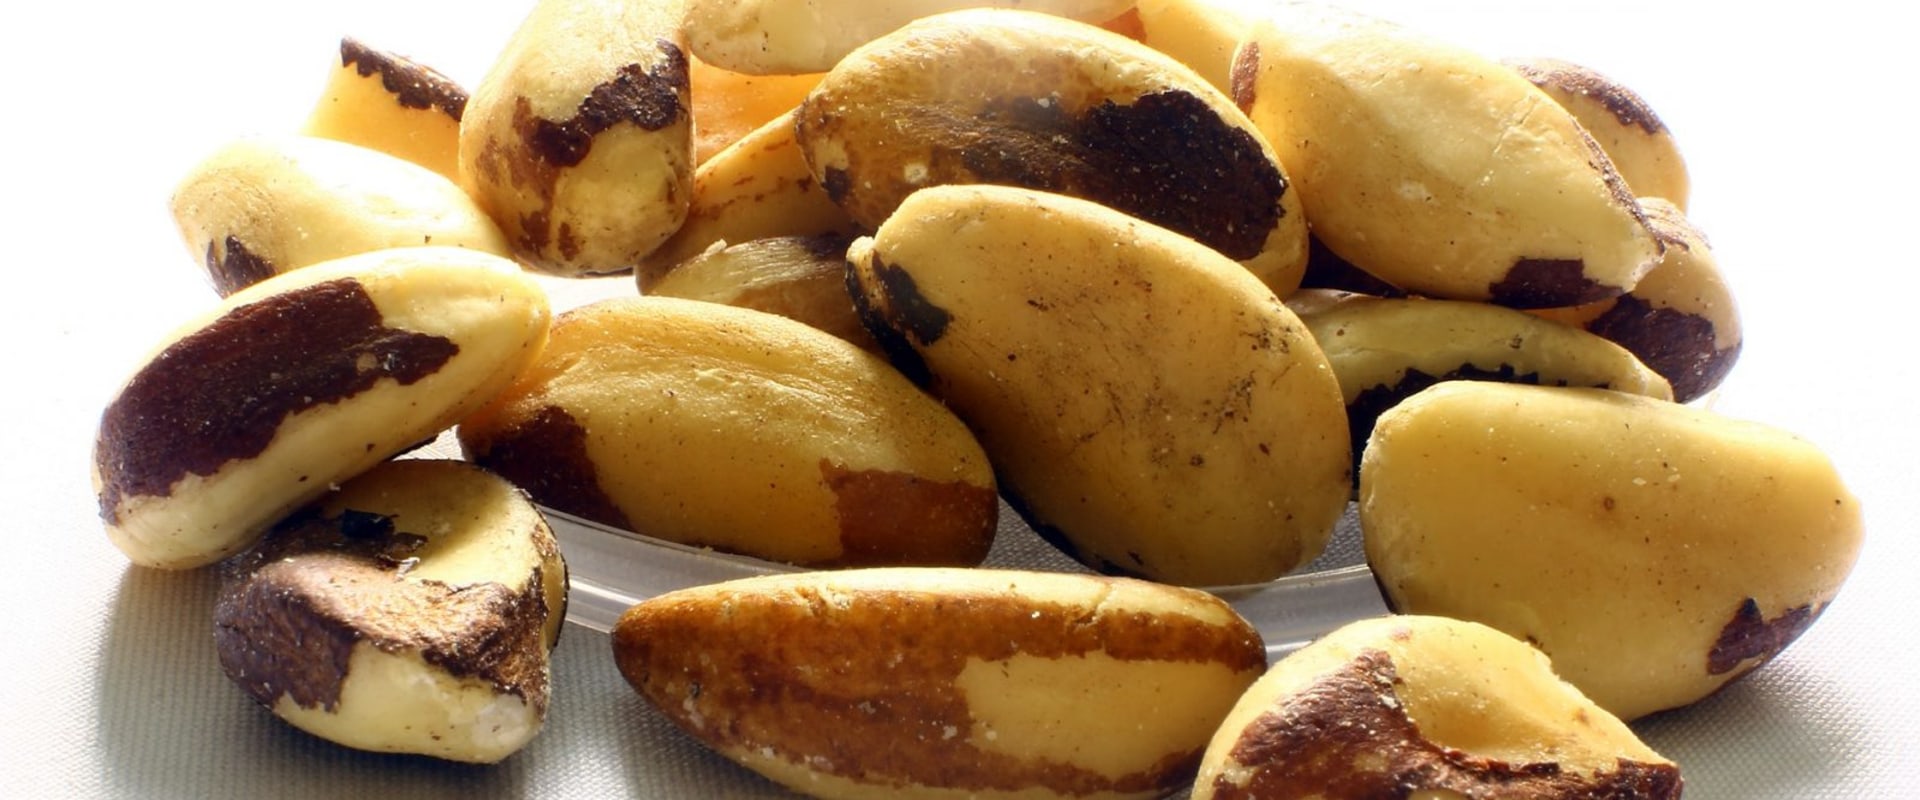 Why can't brazil nuts be farmed?